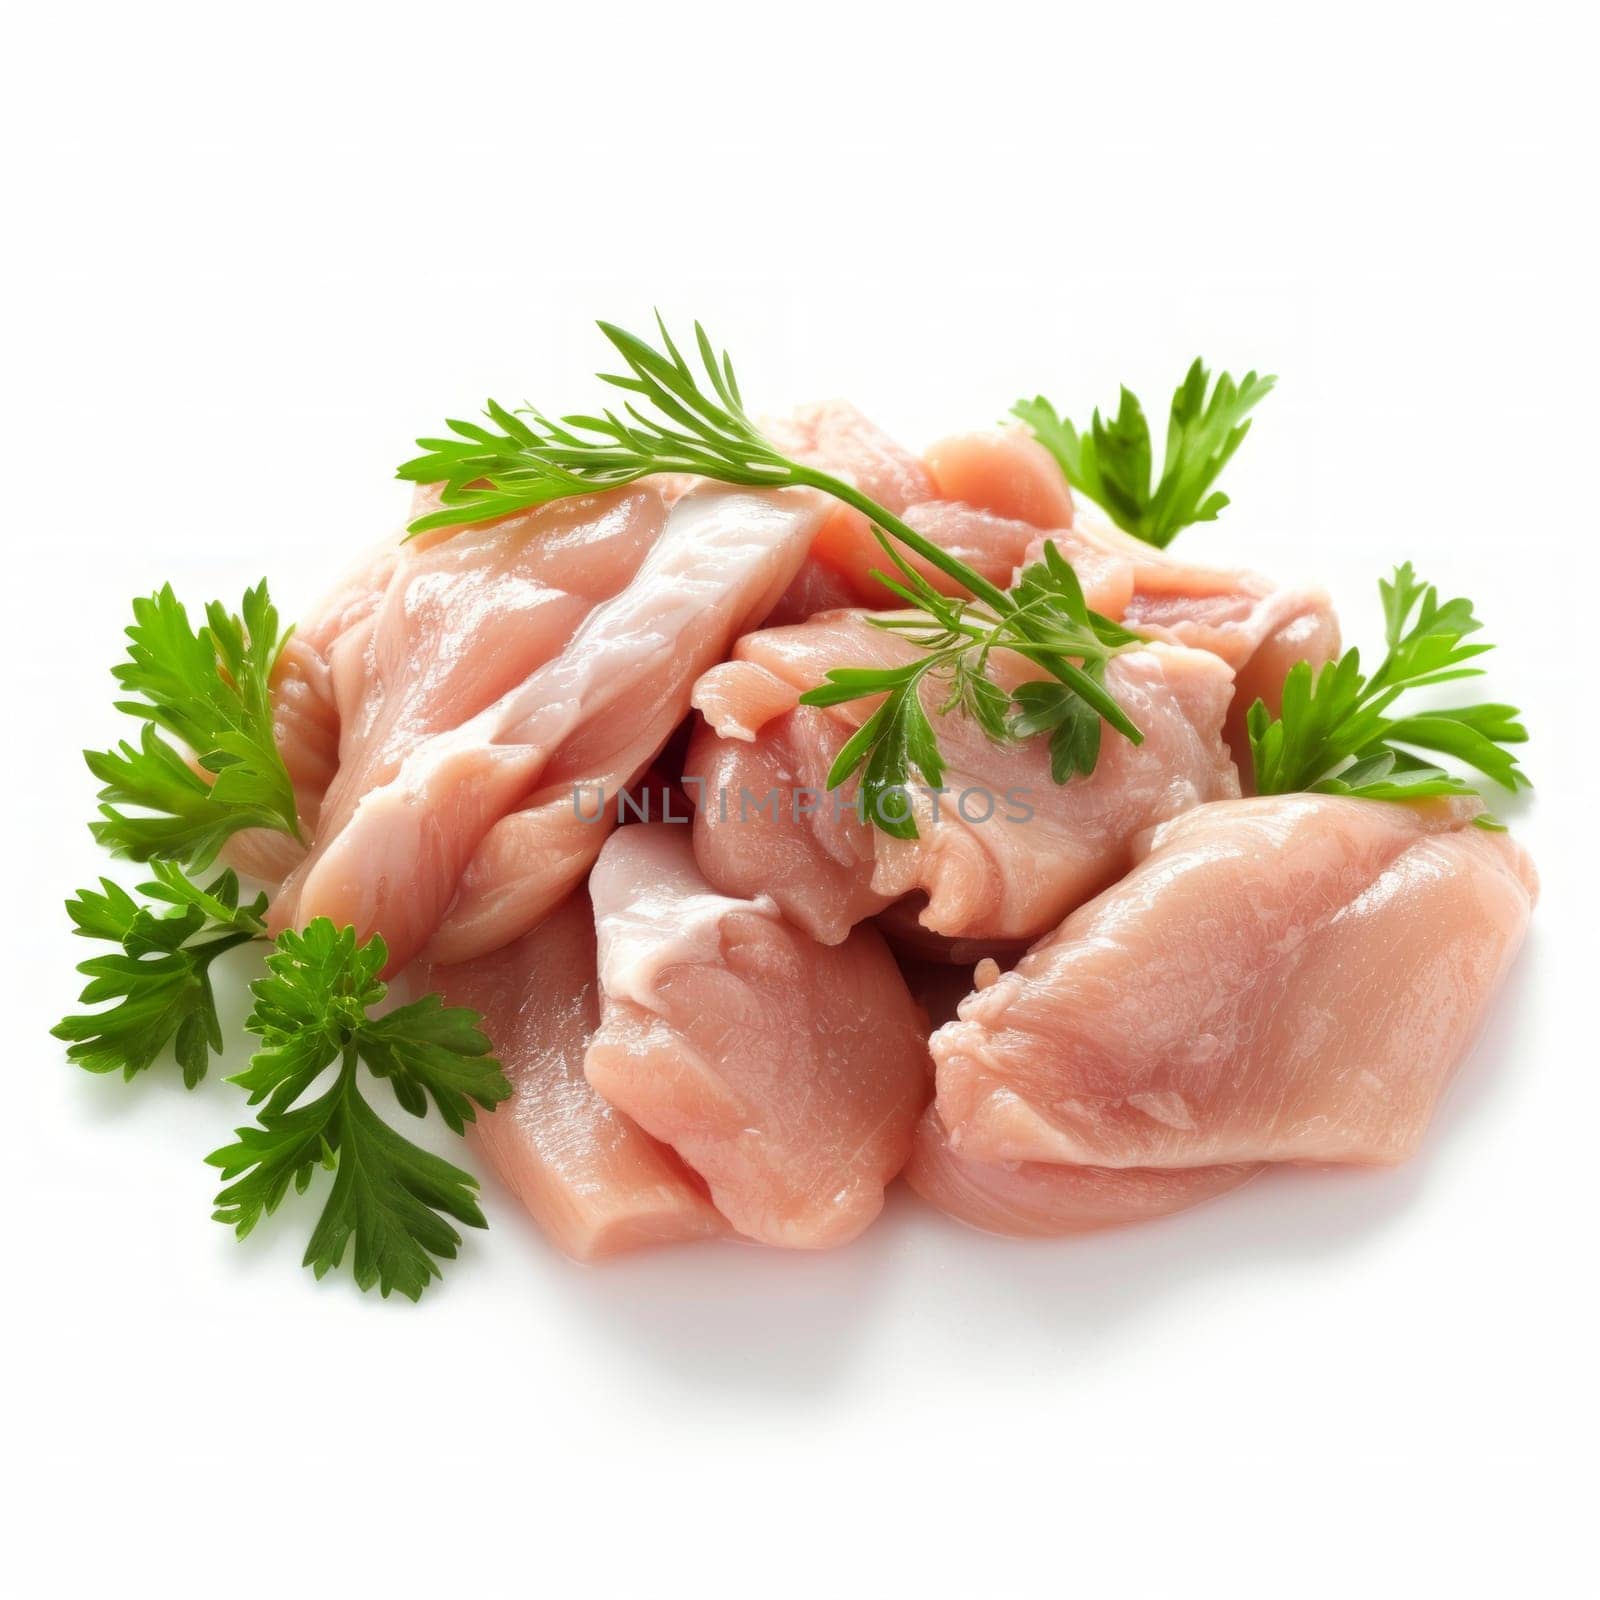 raw chicken pieces with parsley isolated on white background.